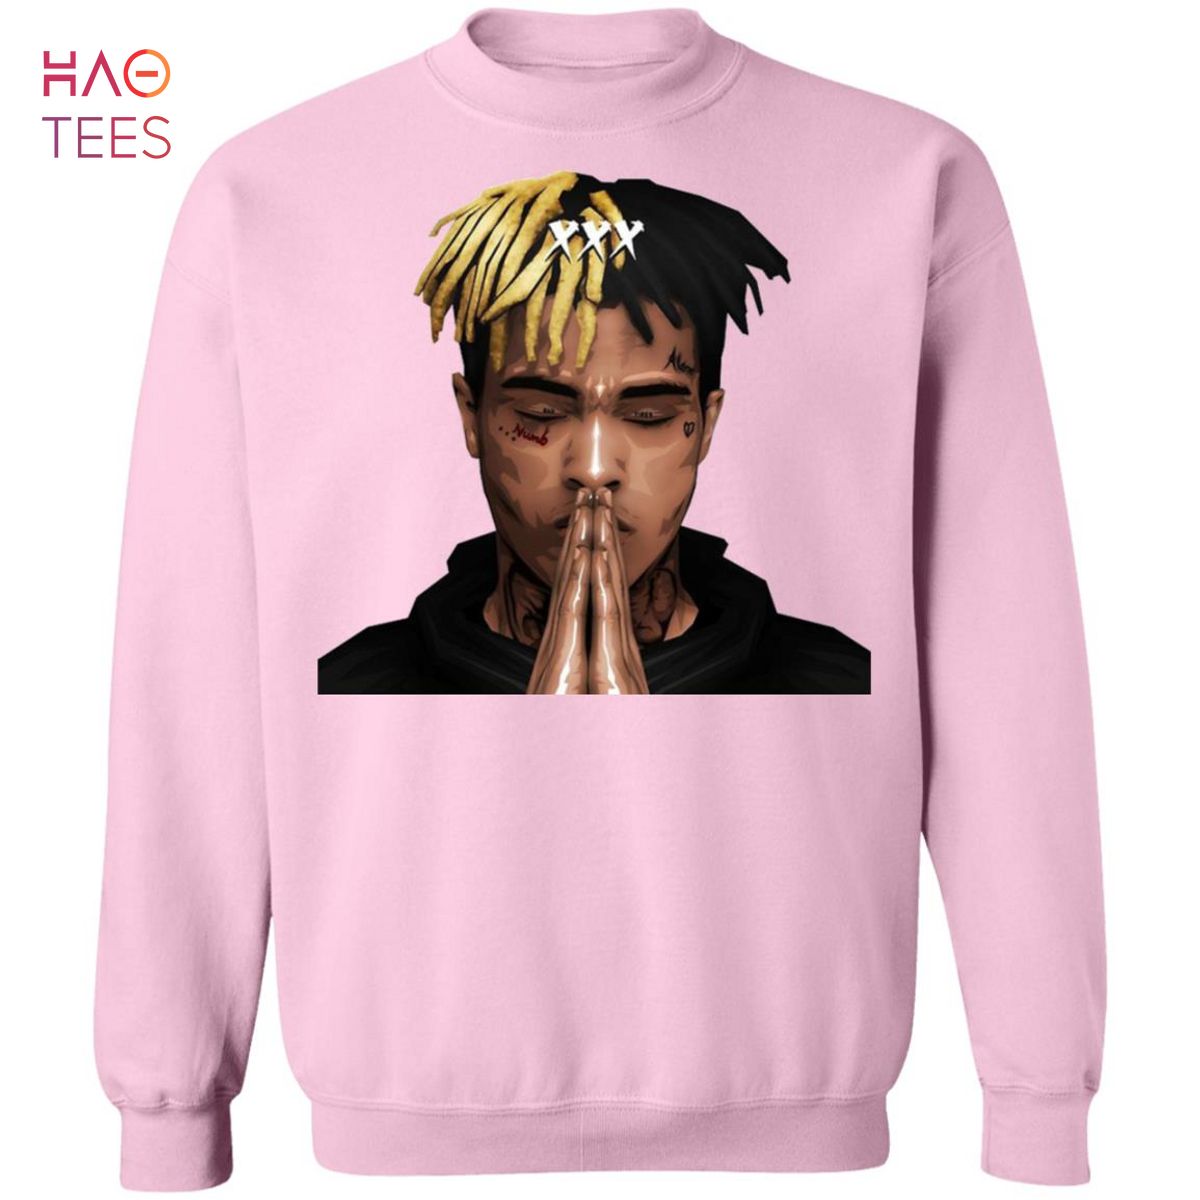 Xxxtentacion Store: Your One-Stop Tribute to the Artist